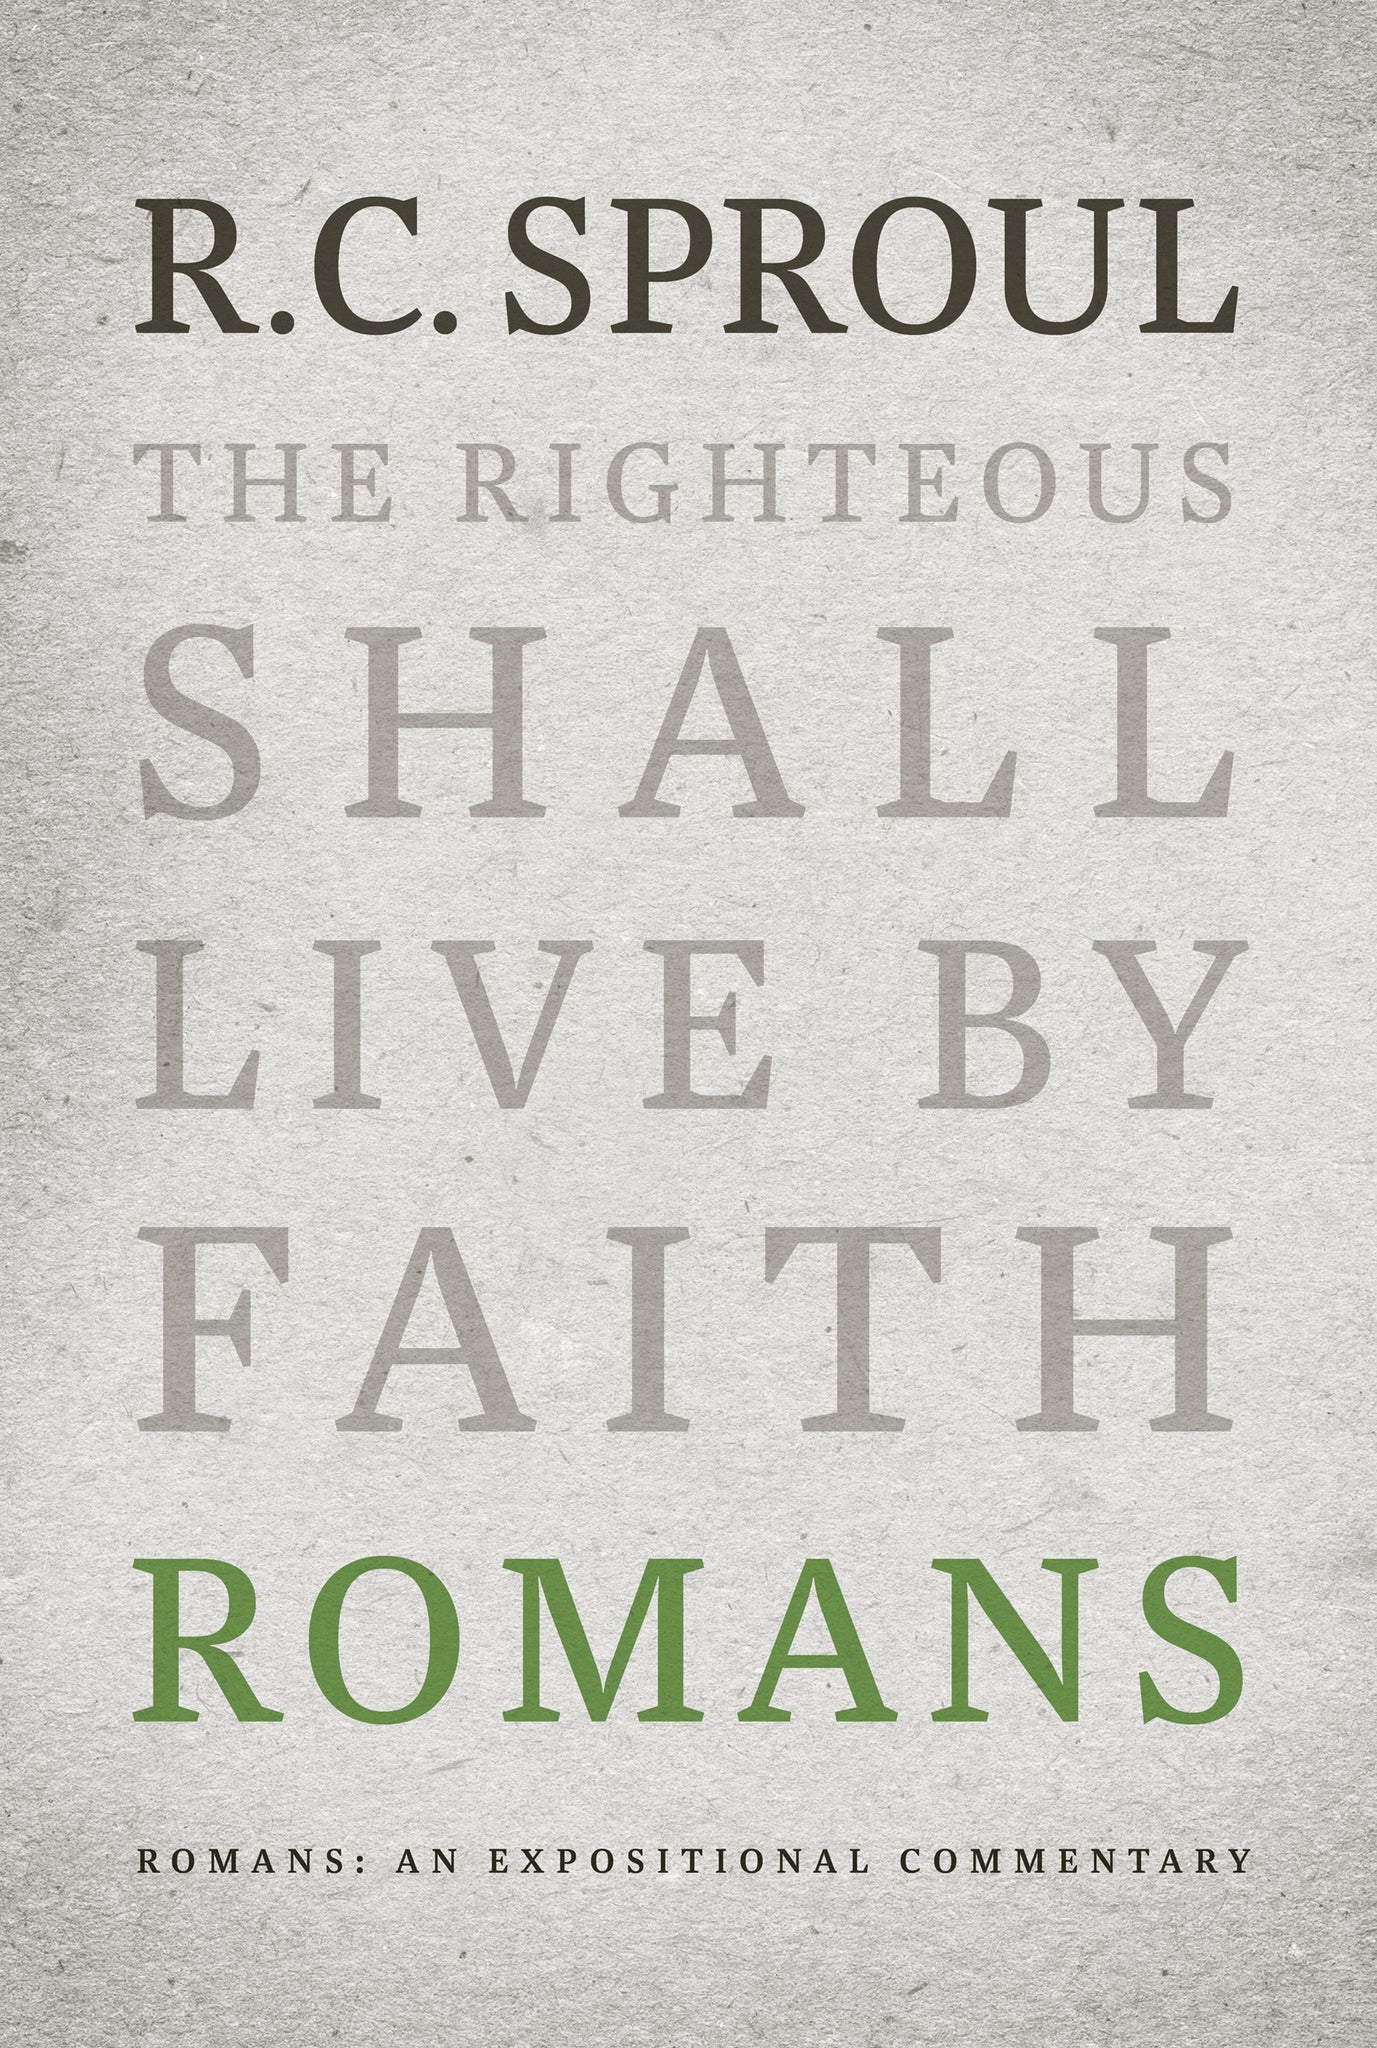 An Expositional Commentary - Romans: The Righteous Shall Live by Faith